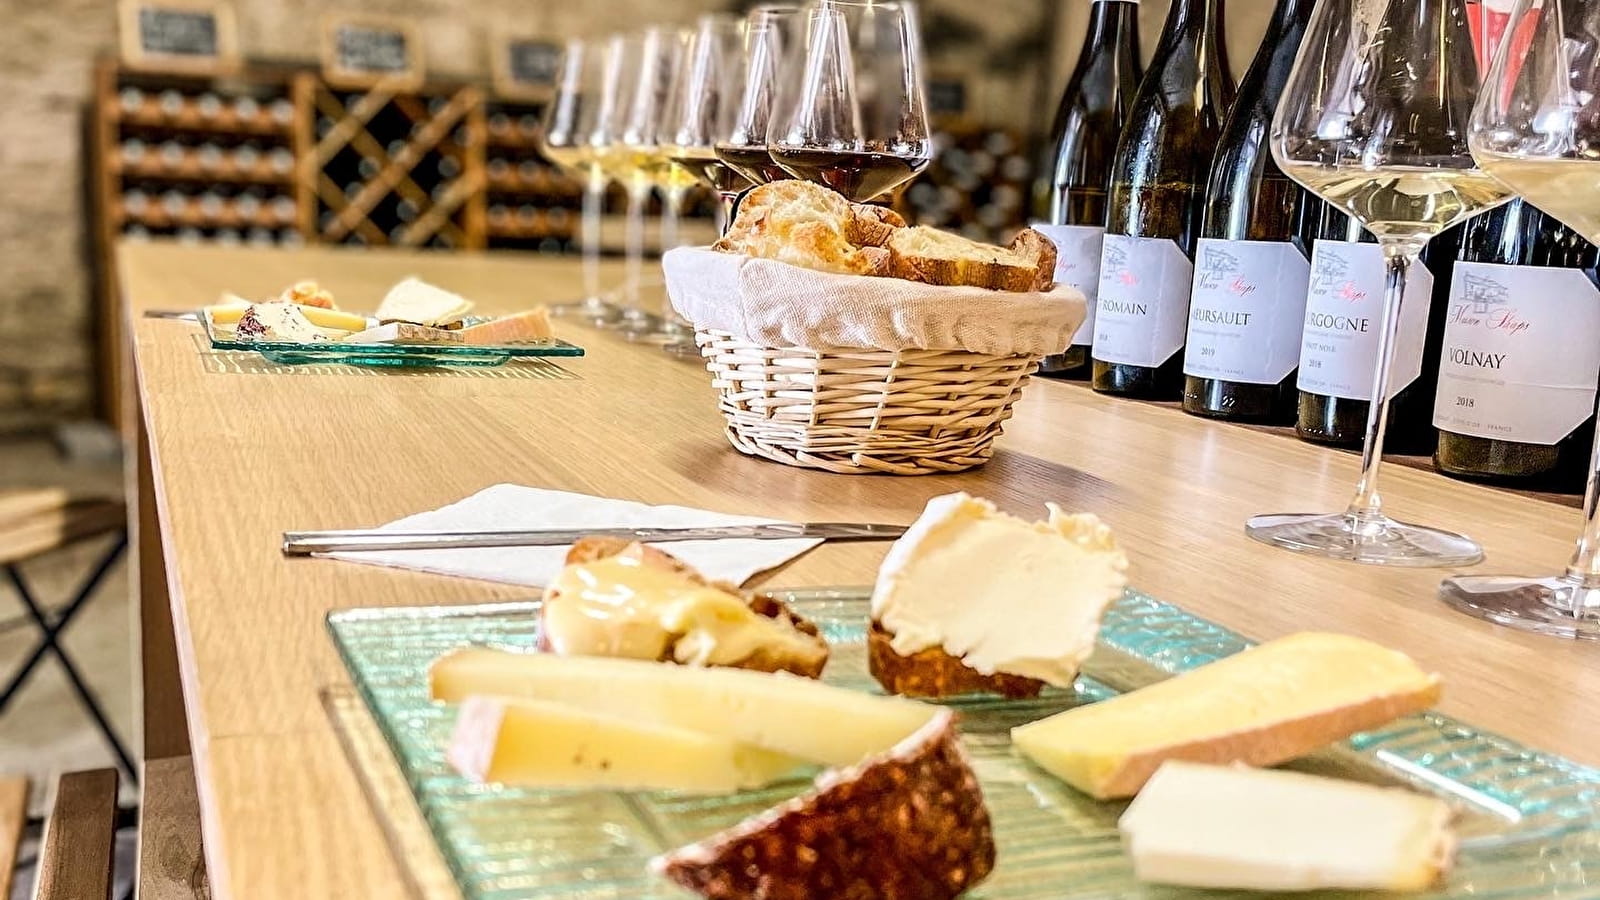 Guided tasting: Cheese and wine pairing at Shaps House